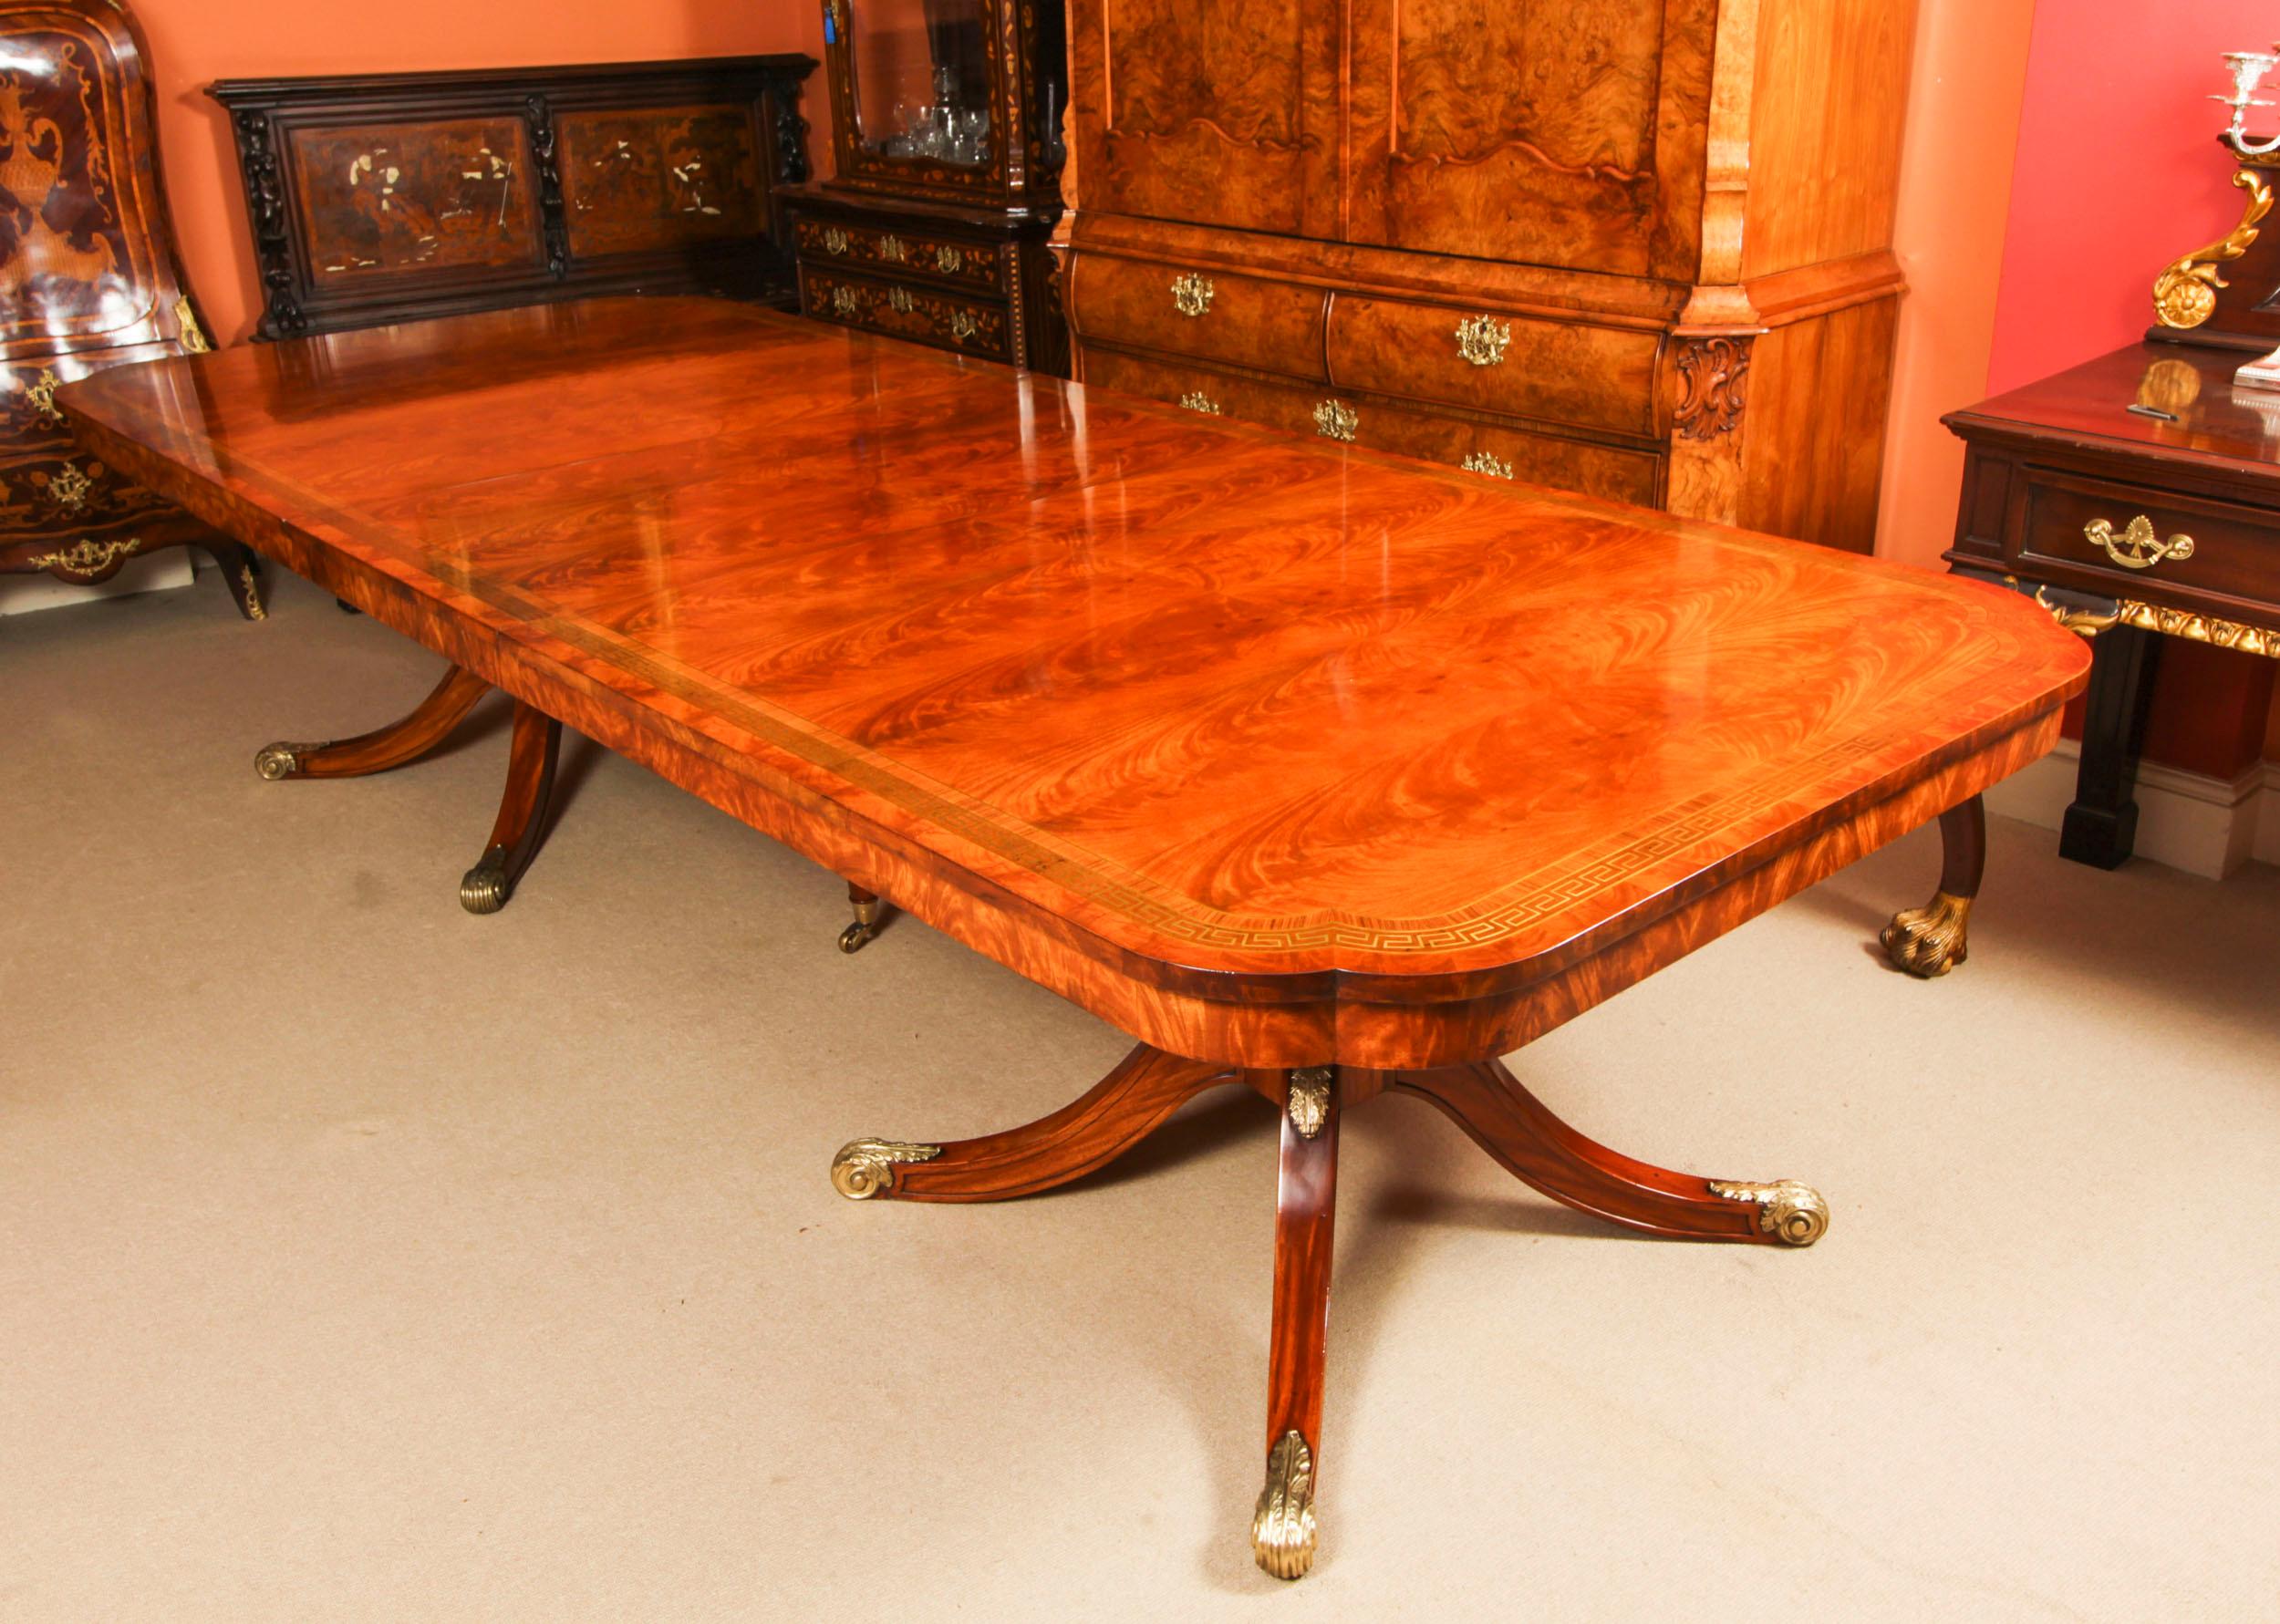 Vintage Brass Inlaid Dining Table 20th C & 14 Antique Athenian Chairs 19th C In Good Condition For Sale In London, GB